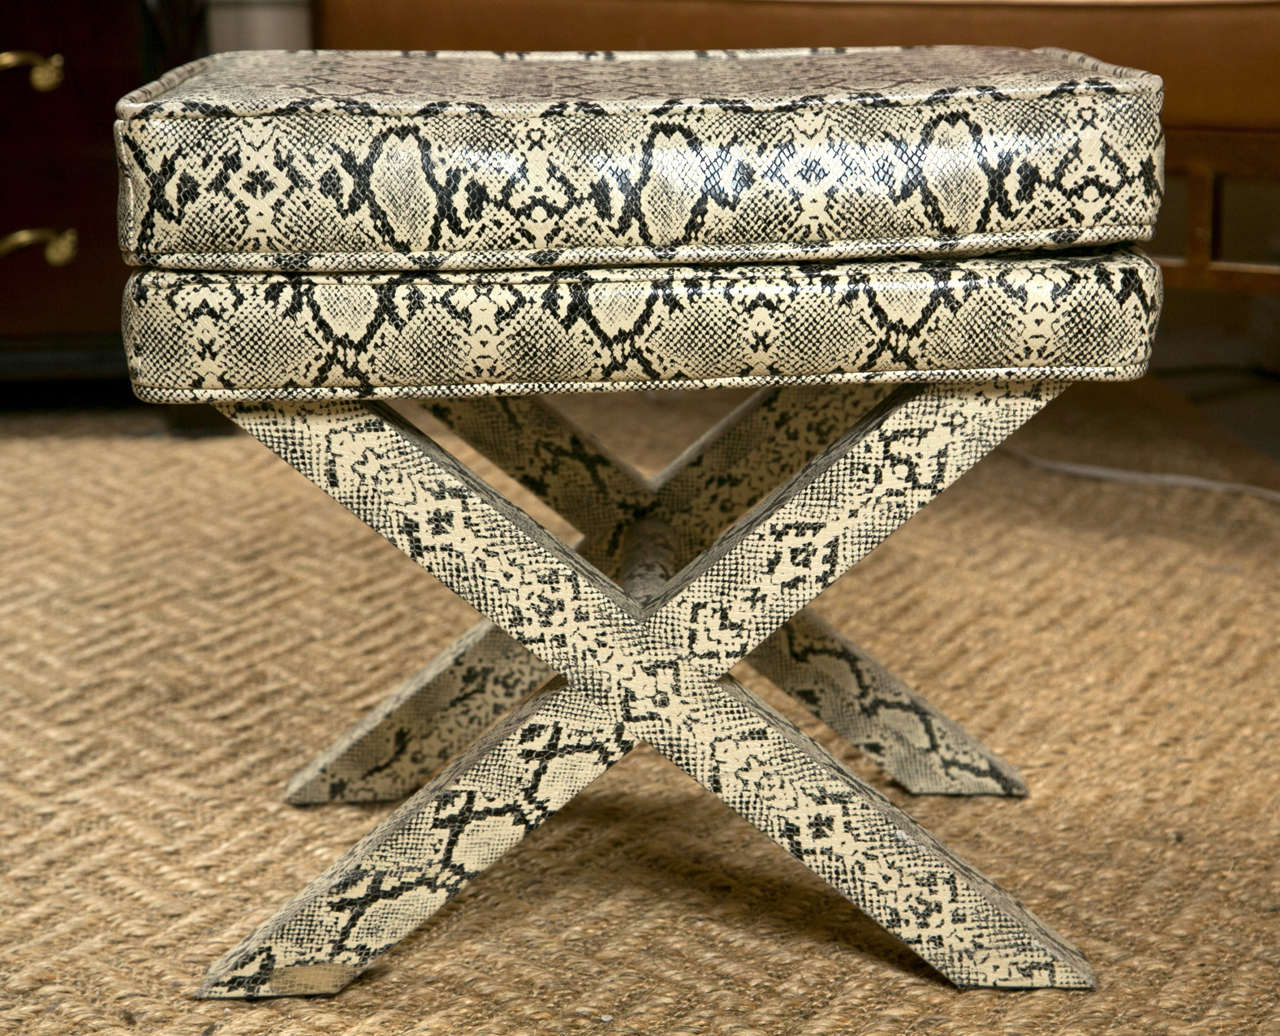 Pair of one-of-a-kind Hollywood Regency style X-base benches, 20th century, upholstered in faux python fabric.